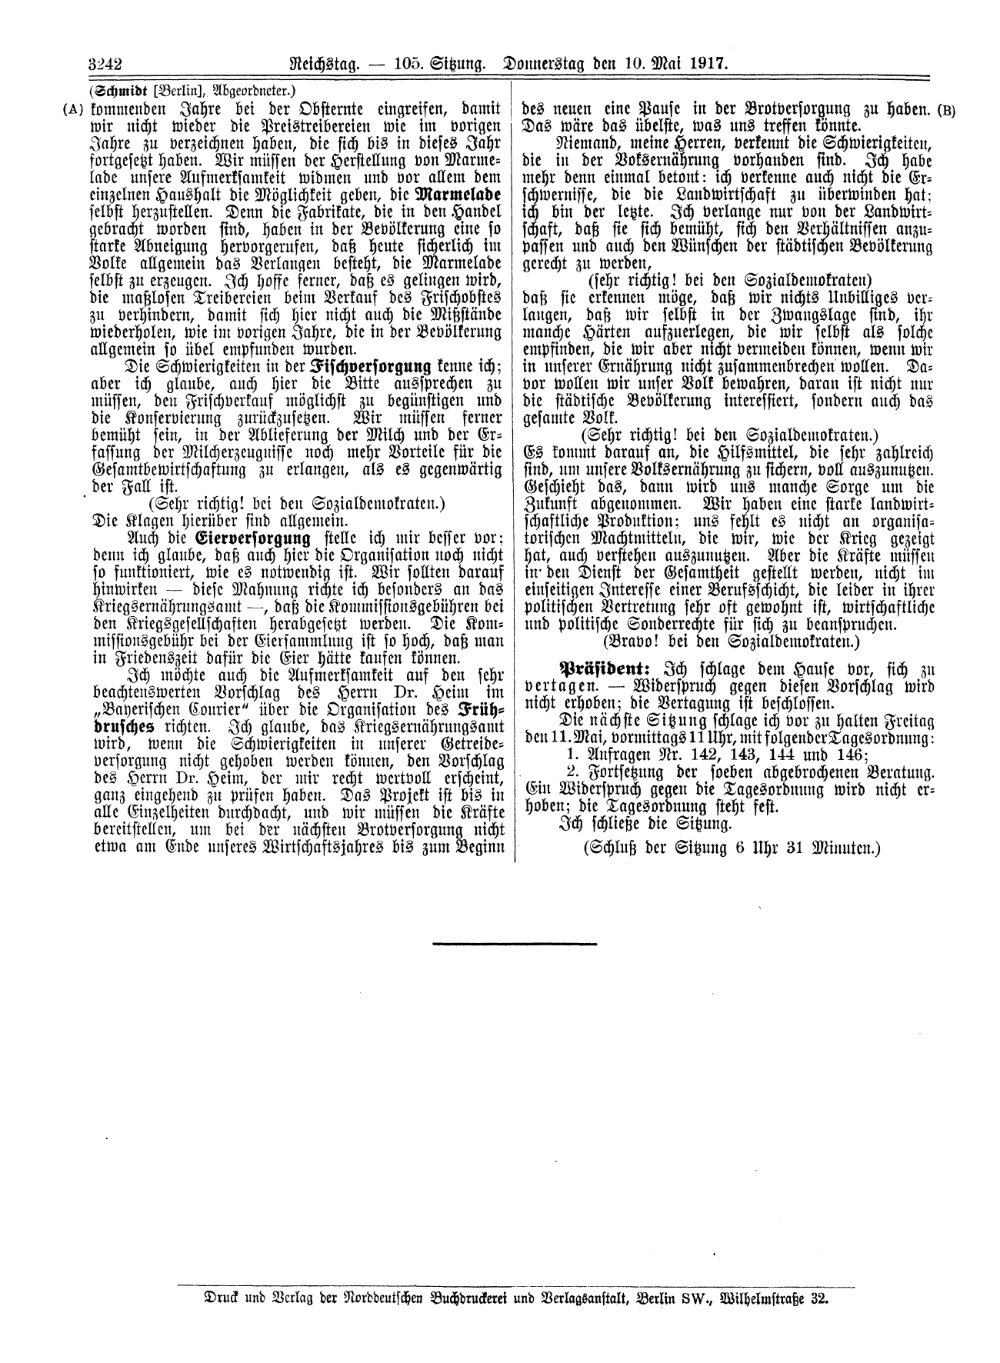 Scan of page 3242